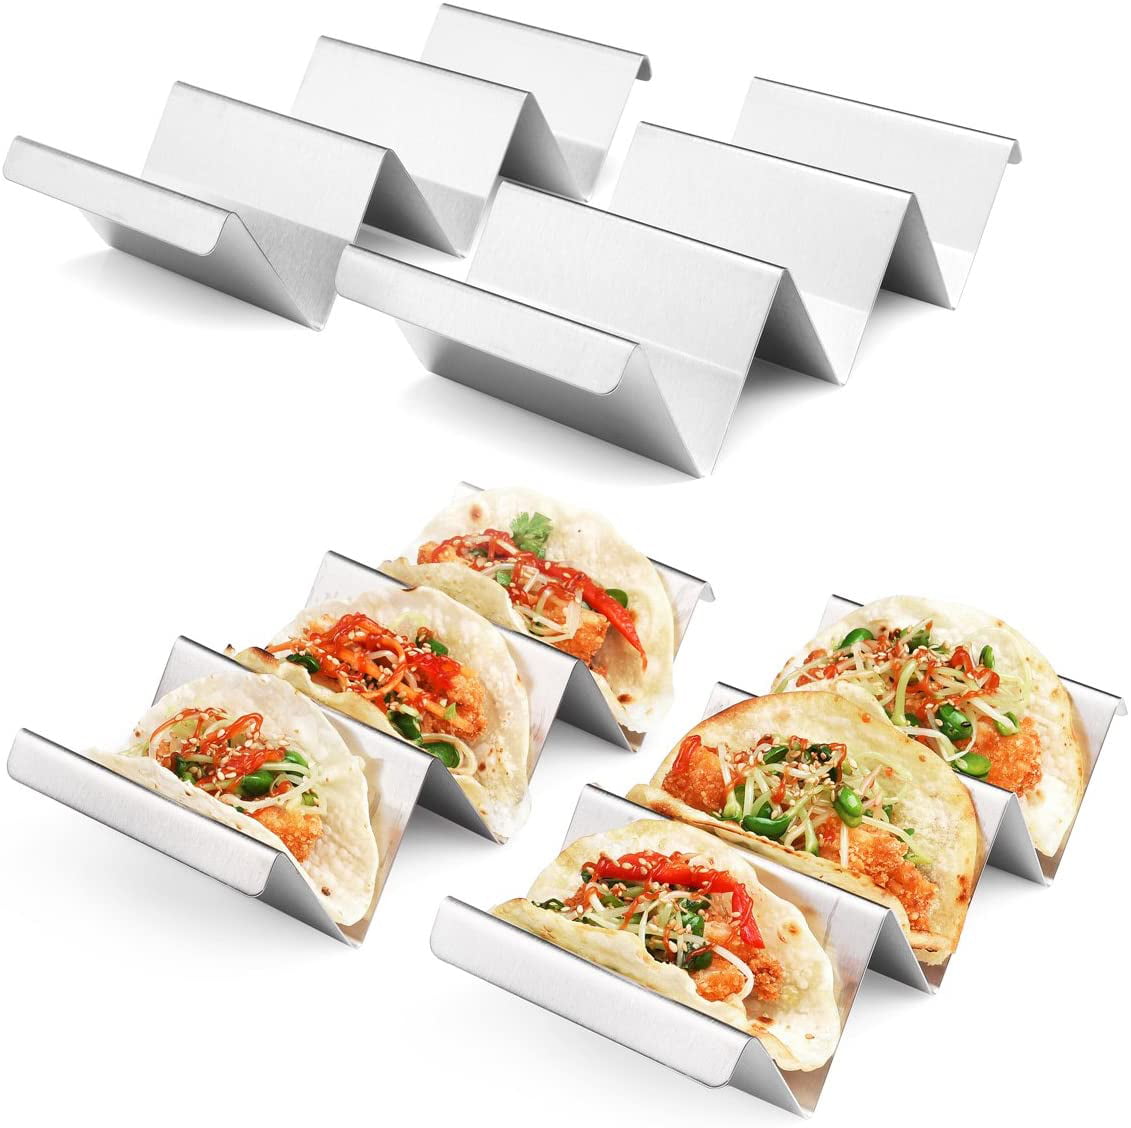 Premium Quality Taco Plates Set of 4 Hold 12 Soft And Hard Shells Taco Holders Stand Titanium Plated Easy To Use Easy To Clean Taco Rack Holder Stand Oven Grill Dishwasher Safe Taco Holder Tray 